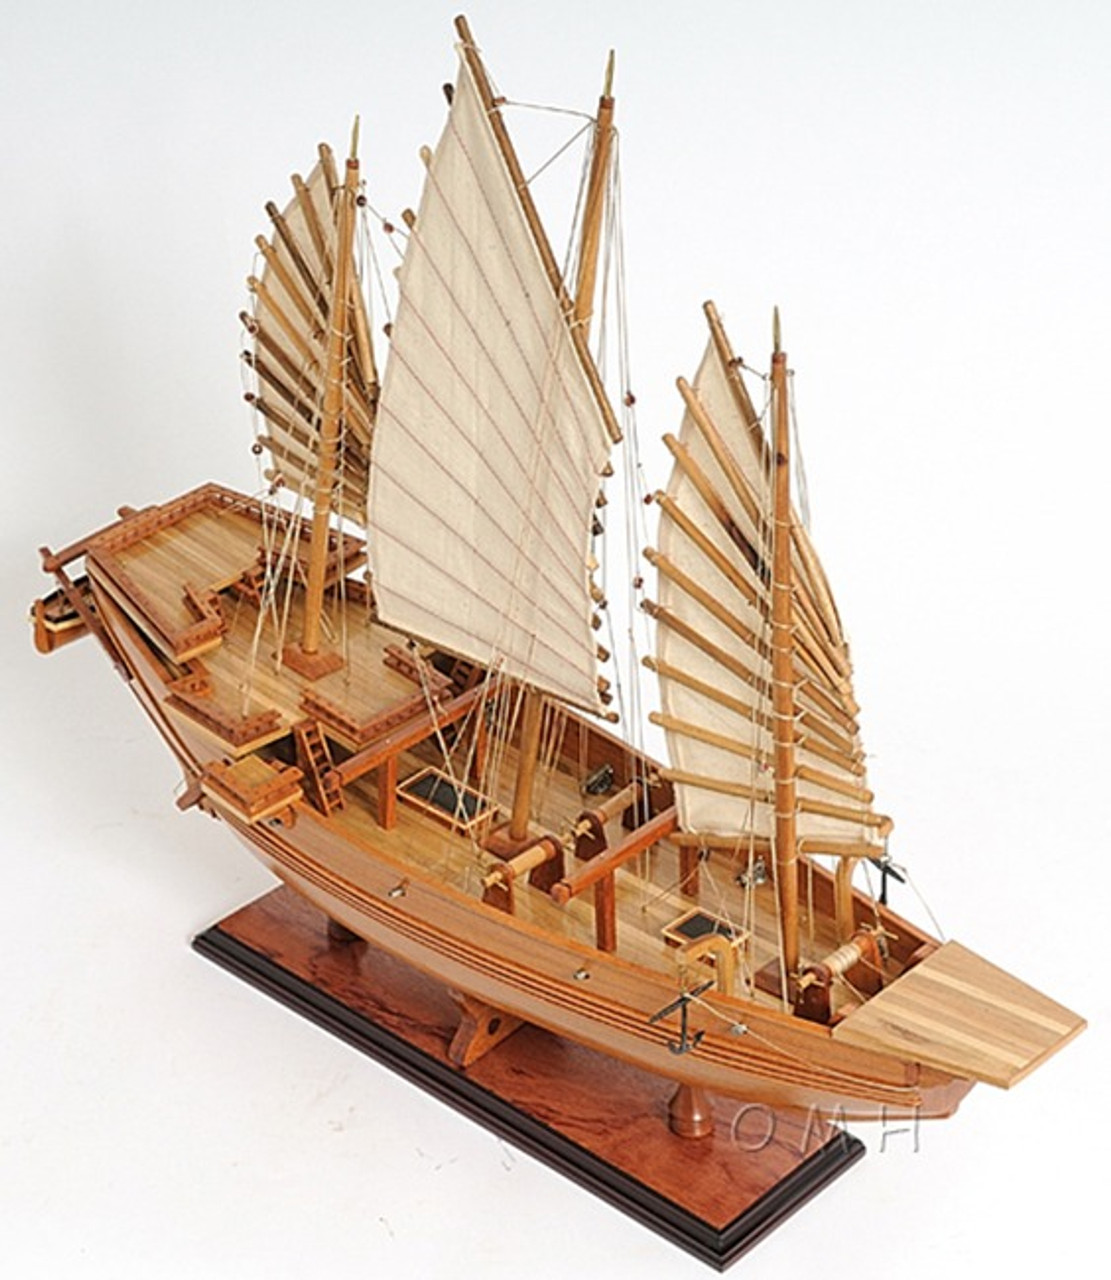 Chinese Junk Wooden Pirate Model Ship Sailboat 27" Boat ...